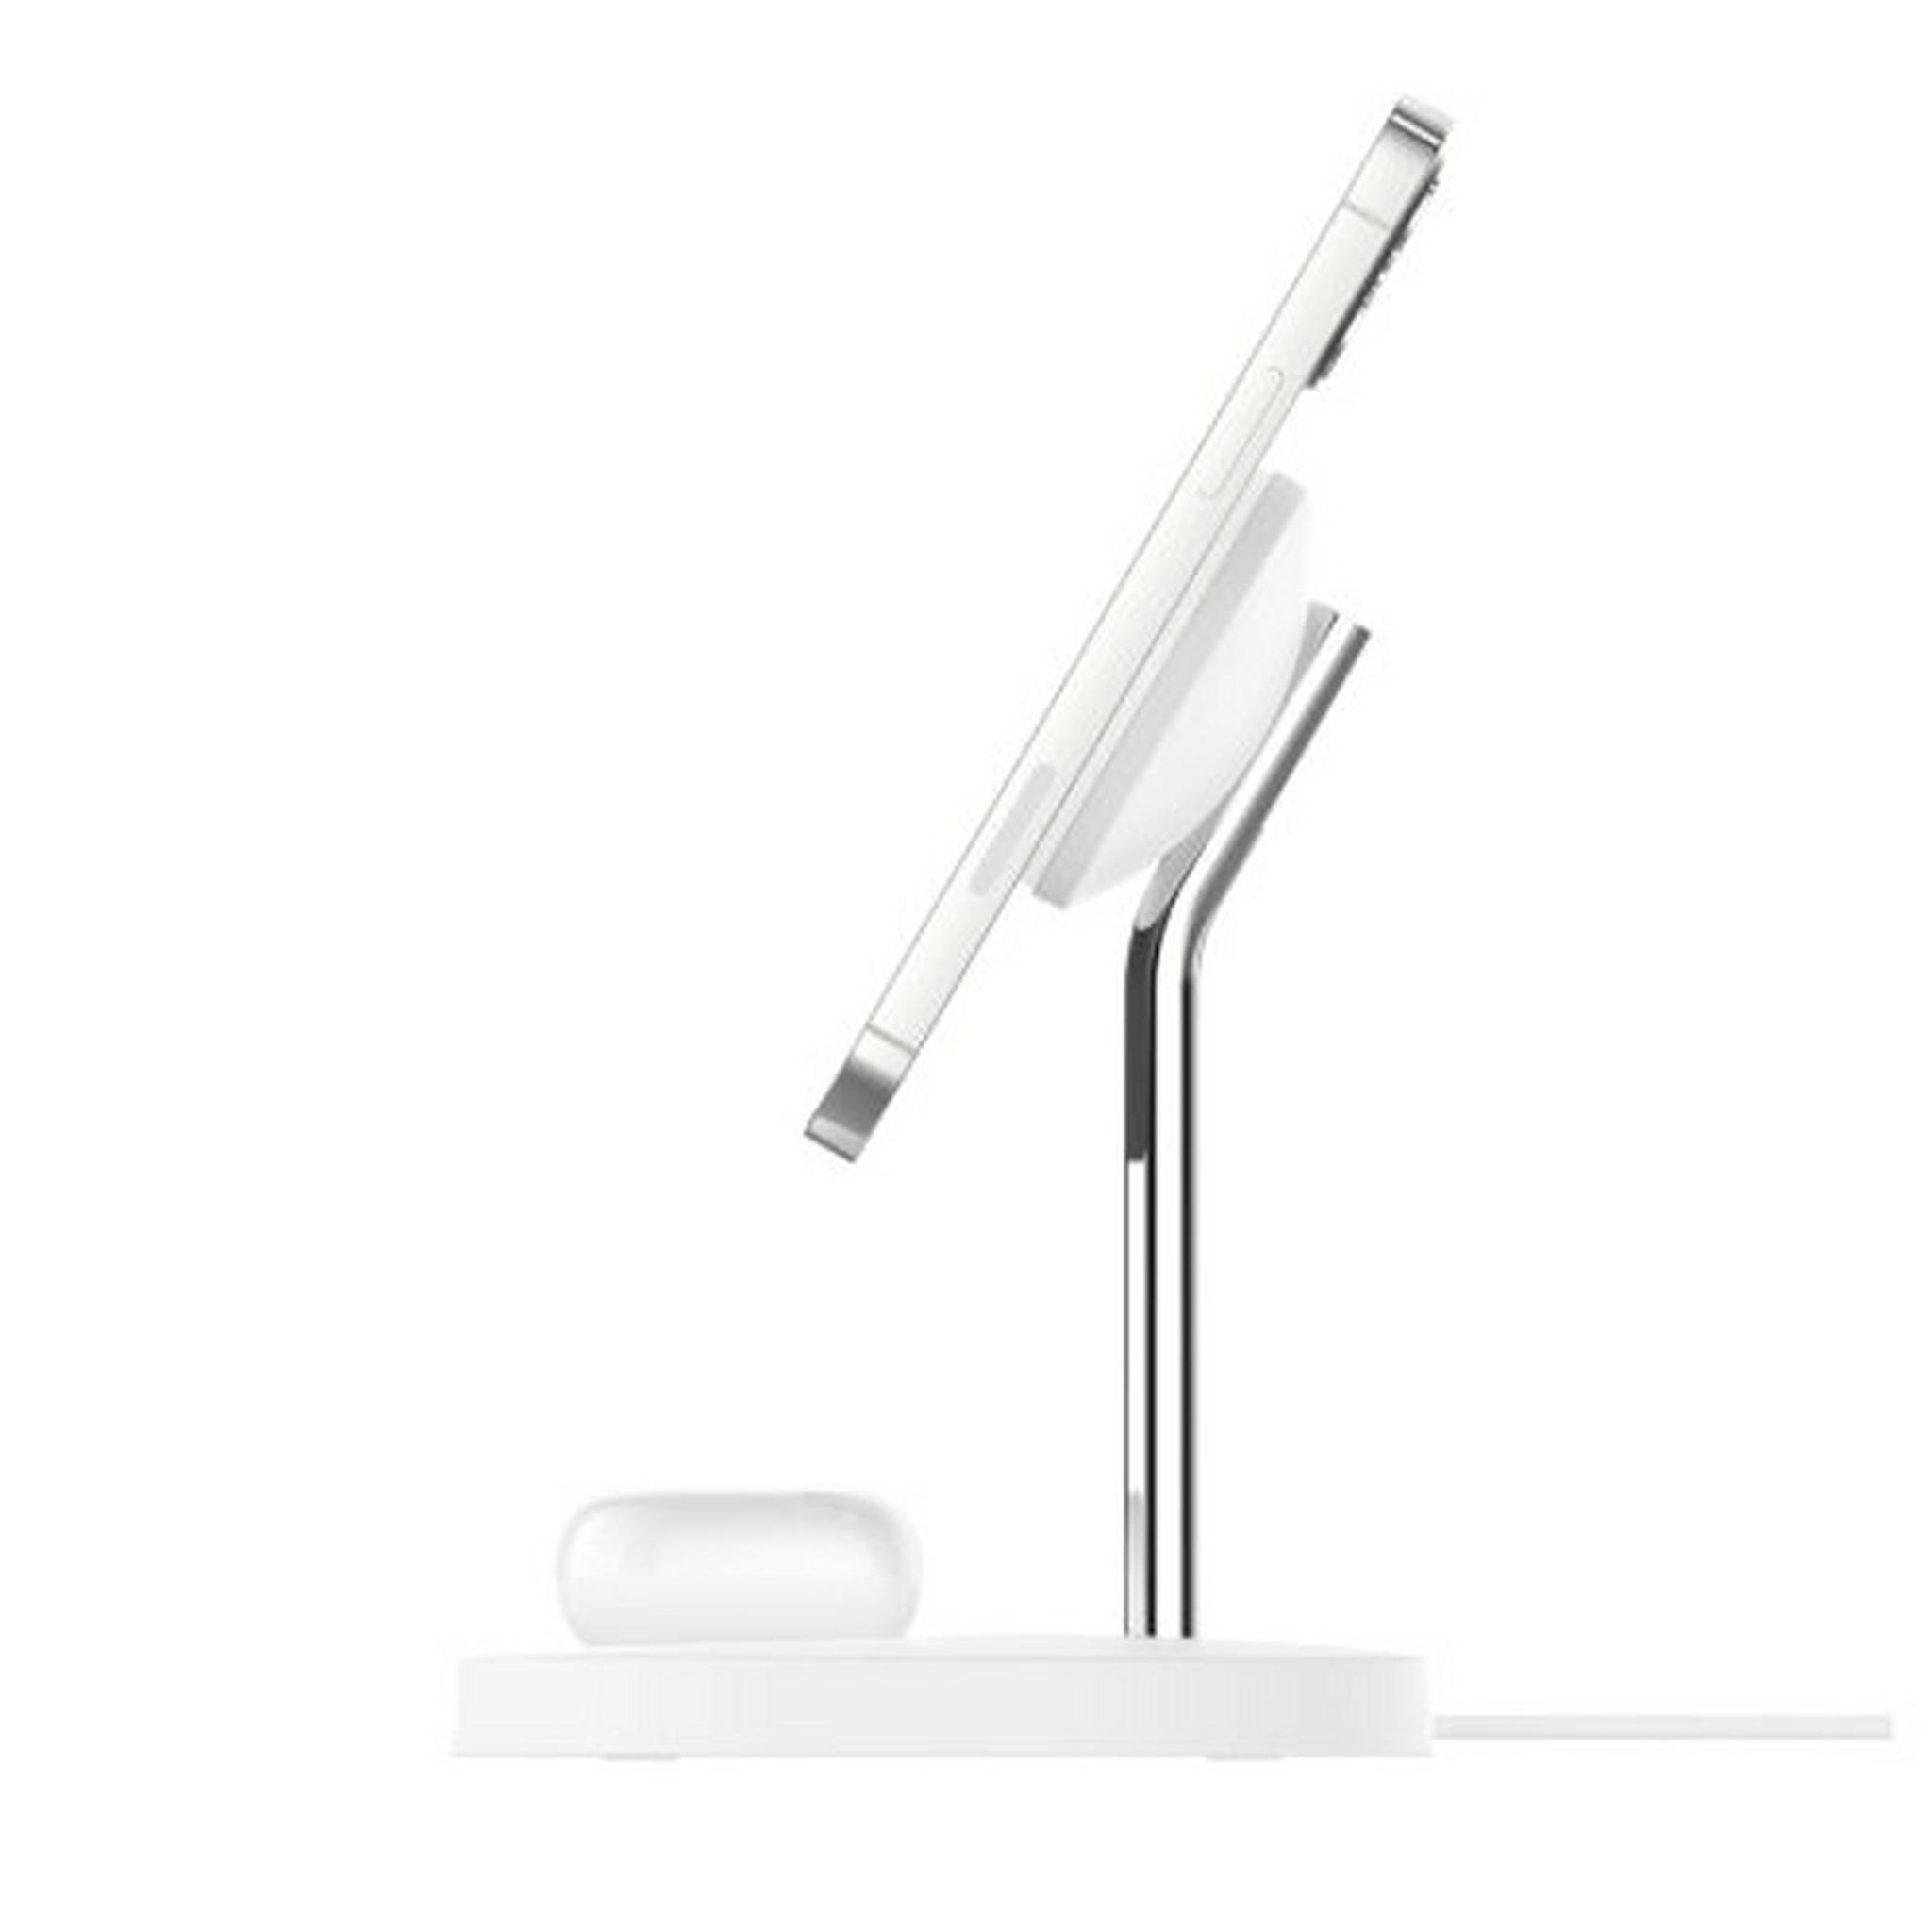 Belkin MagSafe 15W 2 in 1 Wireless Charger Stand – White